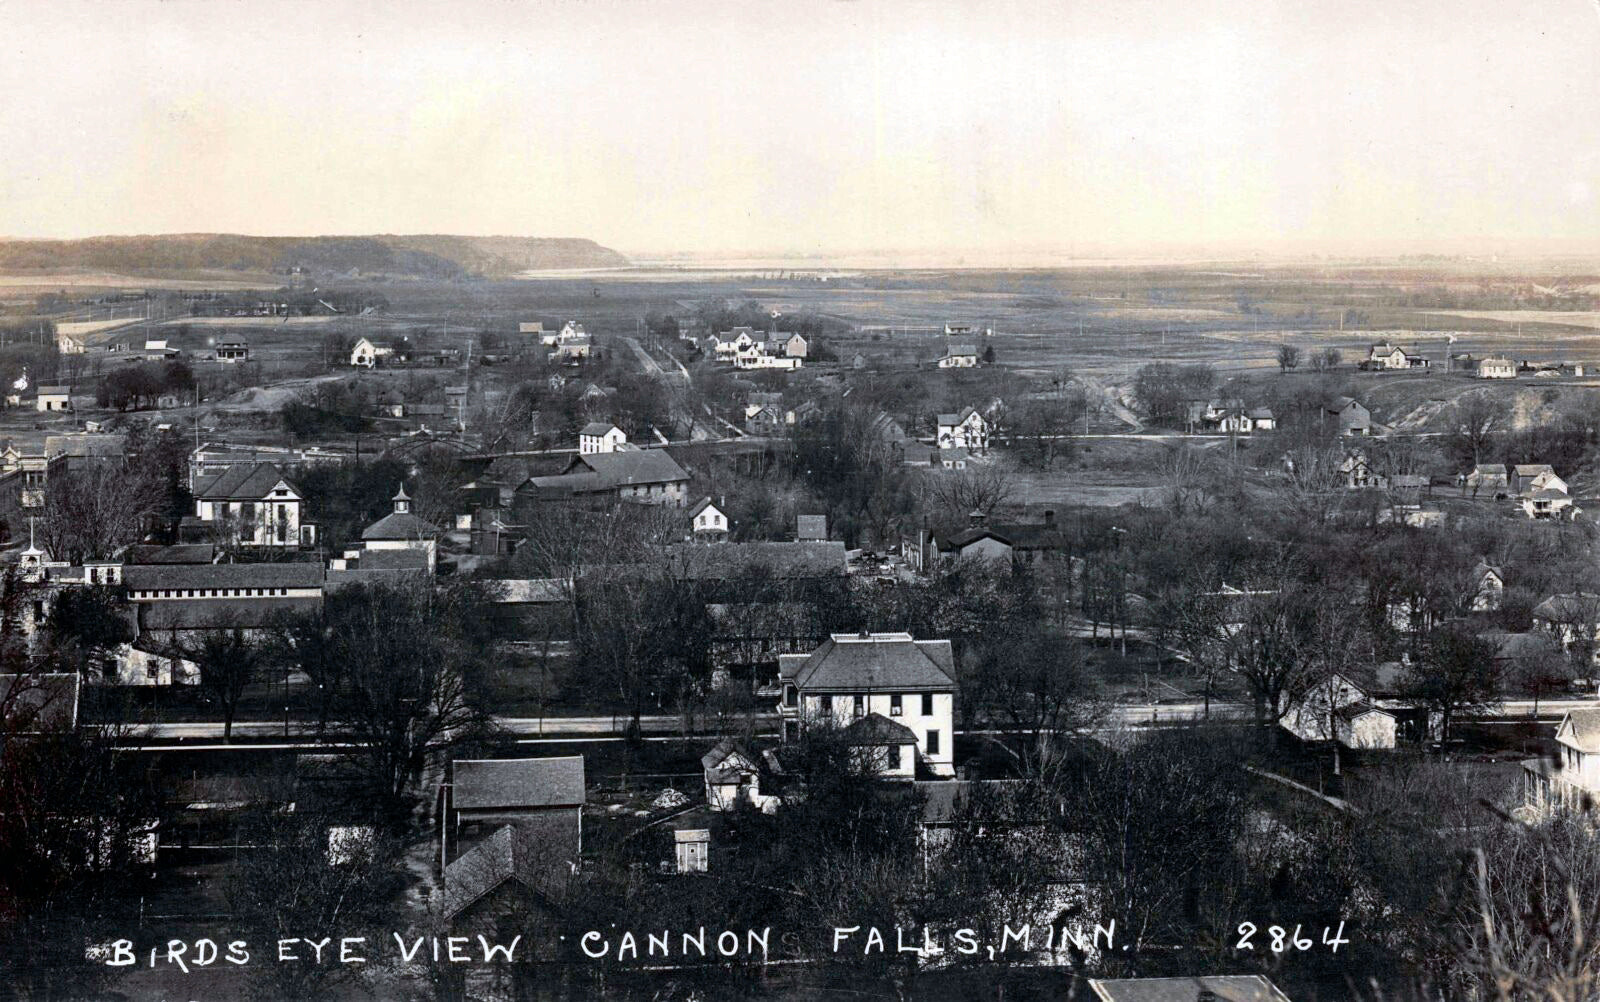 Birds-eye View of Cannon Falls, Minnesota, 1910s Postcard Reproduction